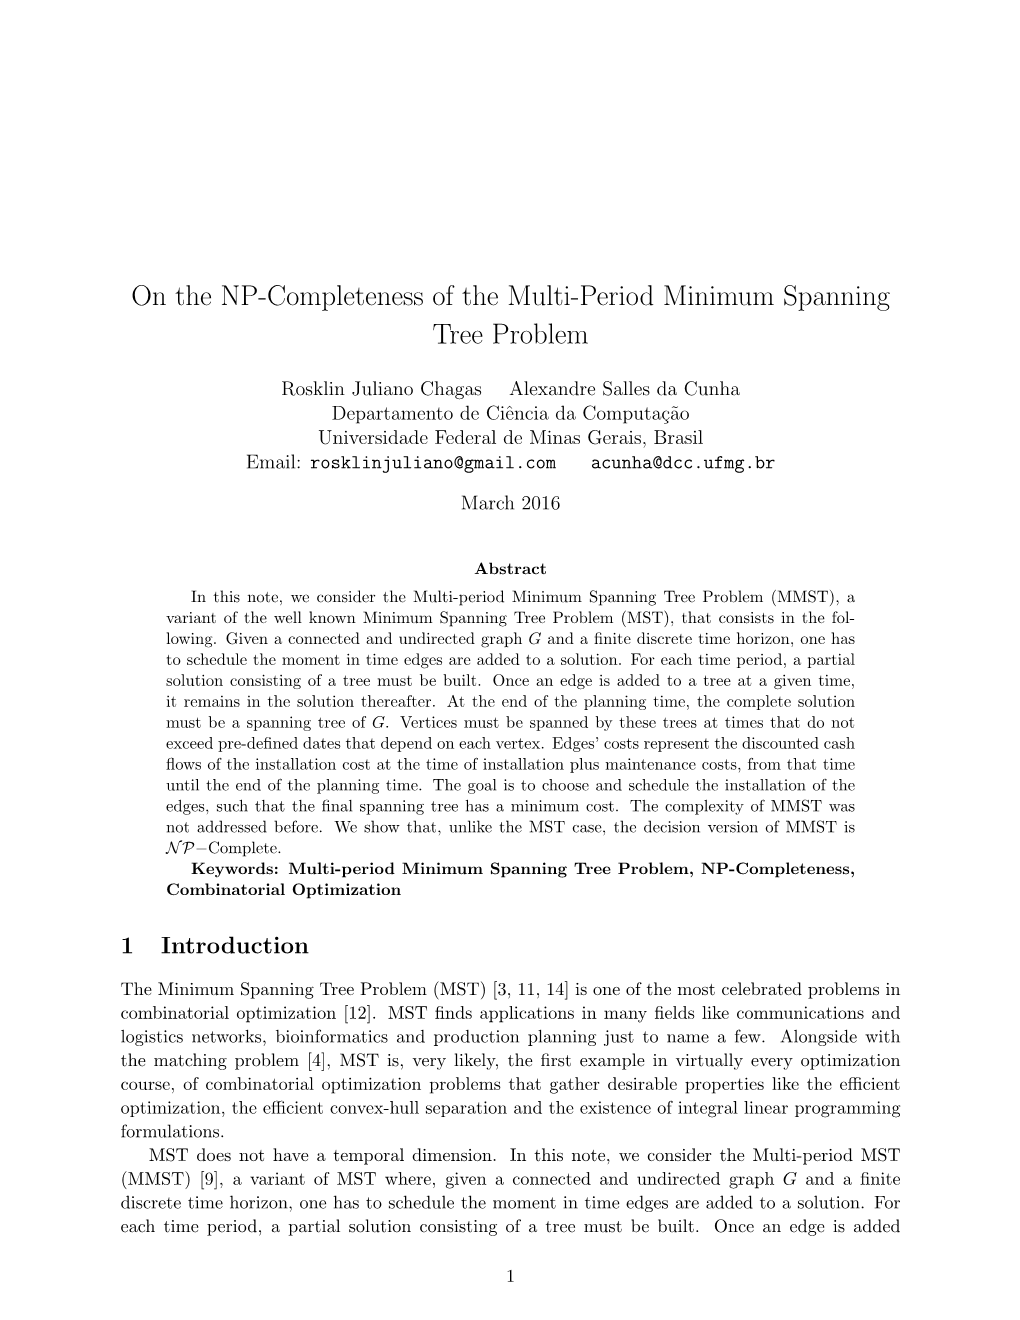 On the NP-Completeness of the Multi-Period Minimum Spanning Tree Problem